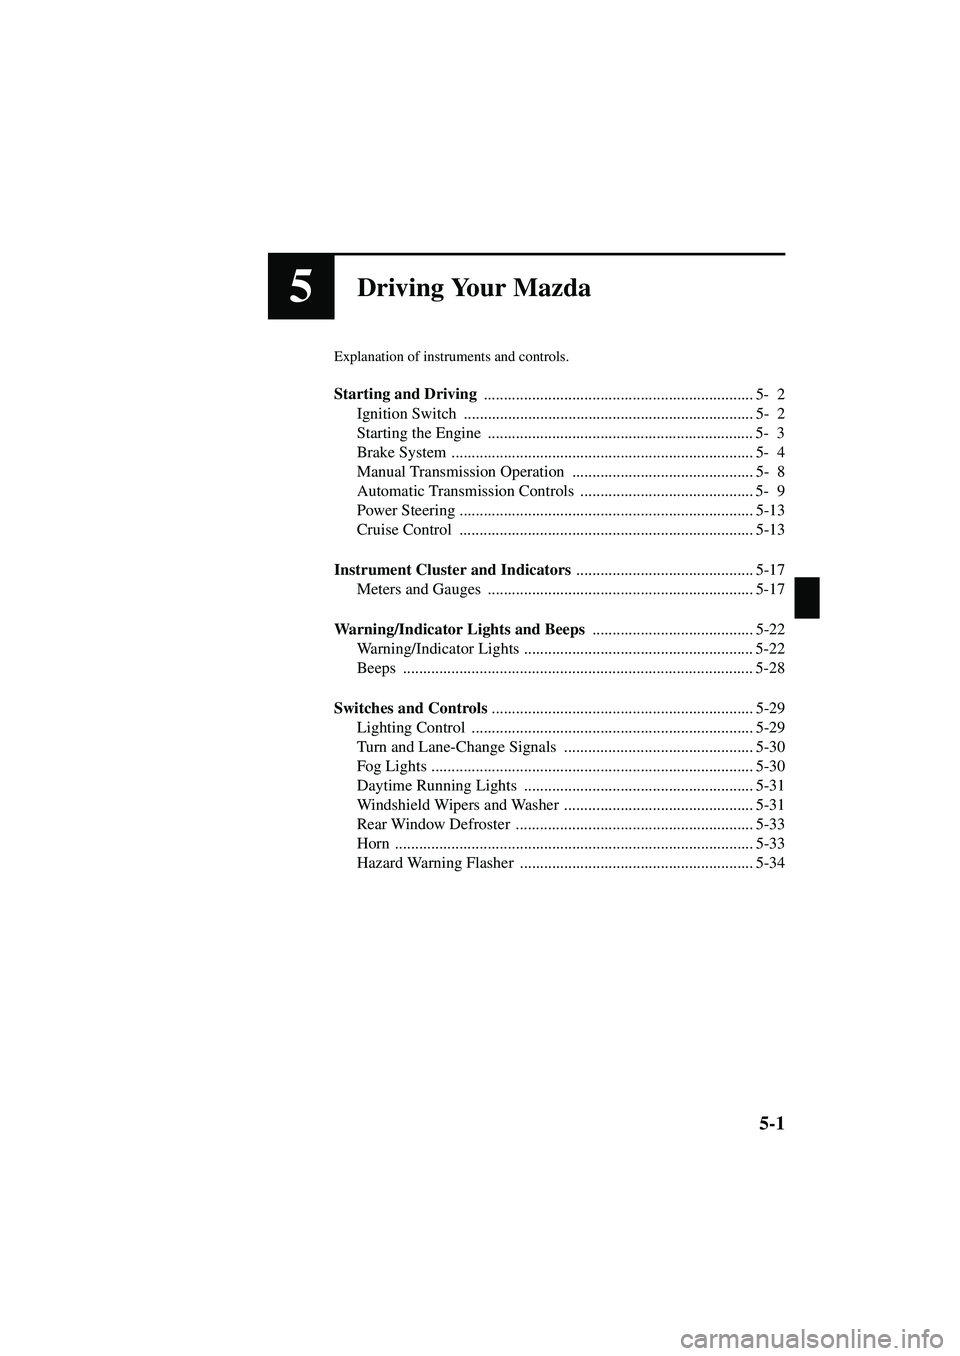 MAZDA MODEL MX-5 MIATA 2002  Owners Manual 5-1
Form No. 8Q42-EA-01F
5Driving Your Mazda
Explanation of instruments and controls.
Starting and Driving ................................................................... 5- 2
Ignition Switch  ...